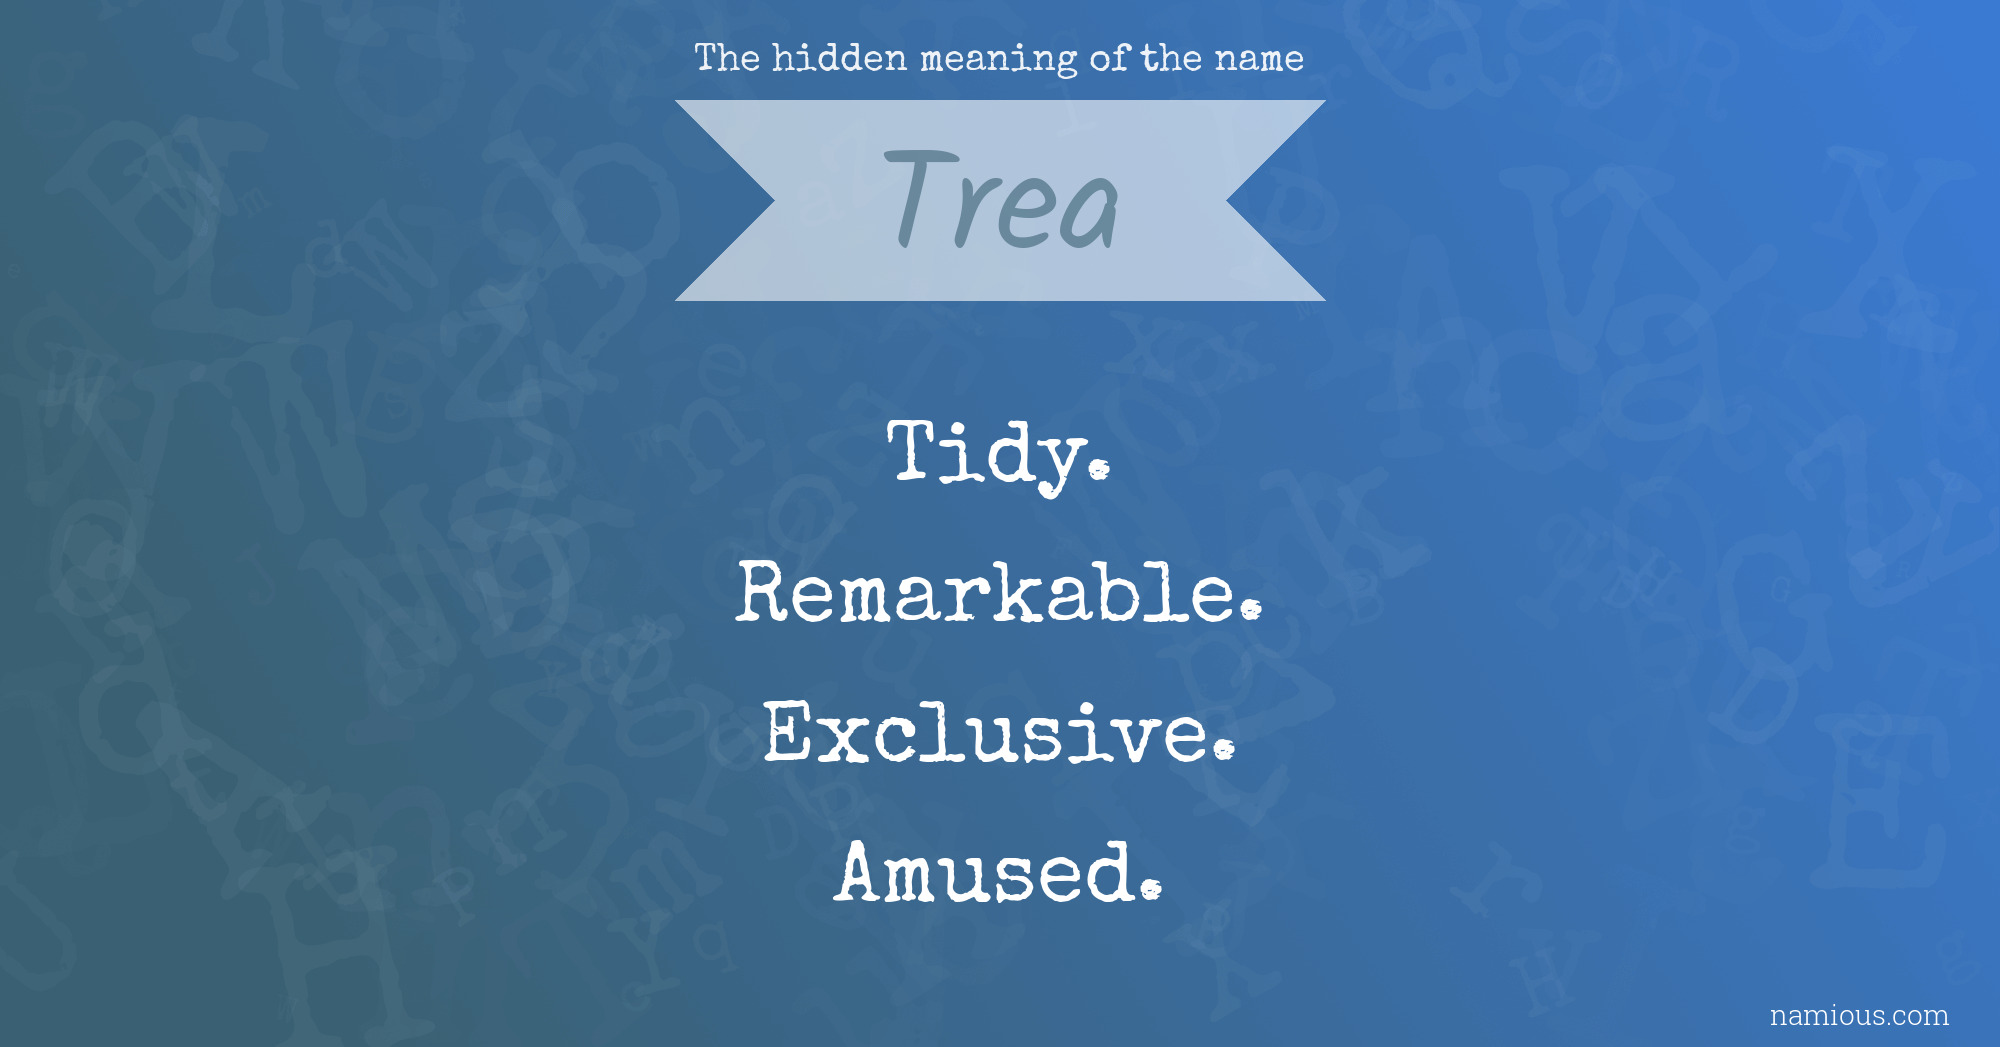 The hidden meaning of the name Trea